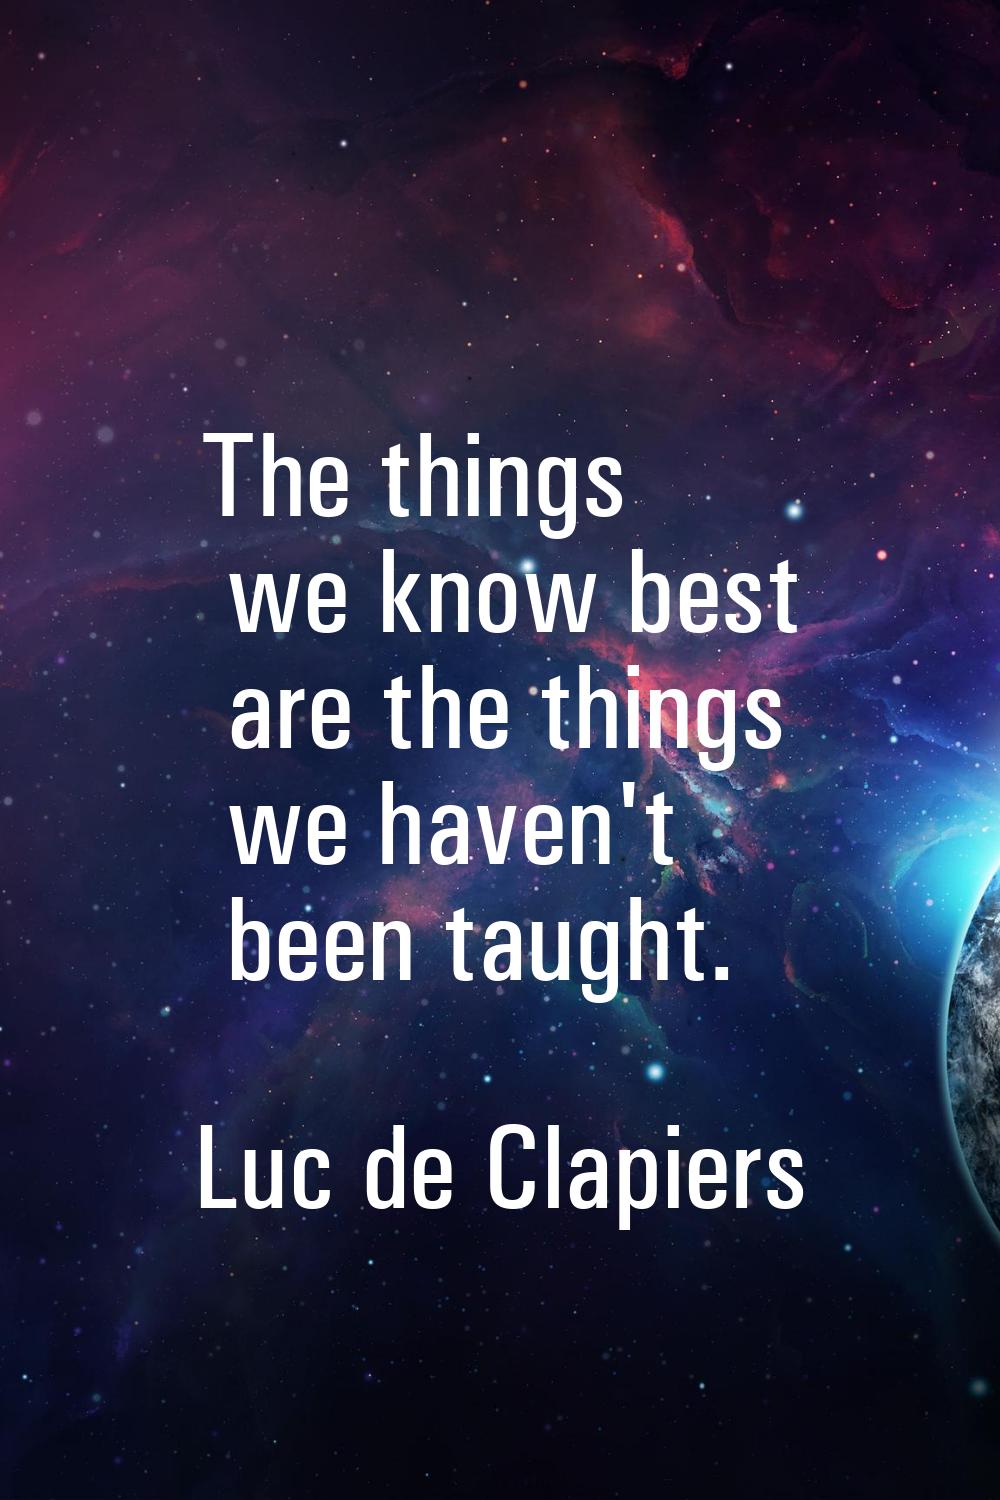 The things we know best are the things we haven't been taught.